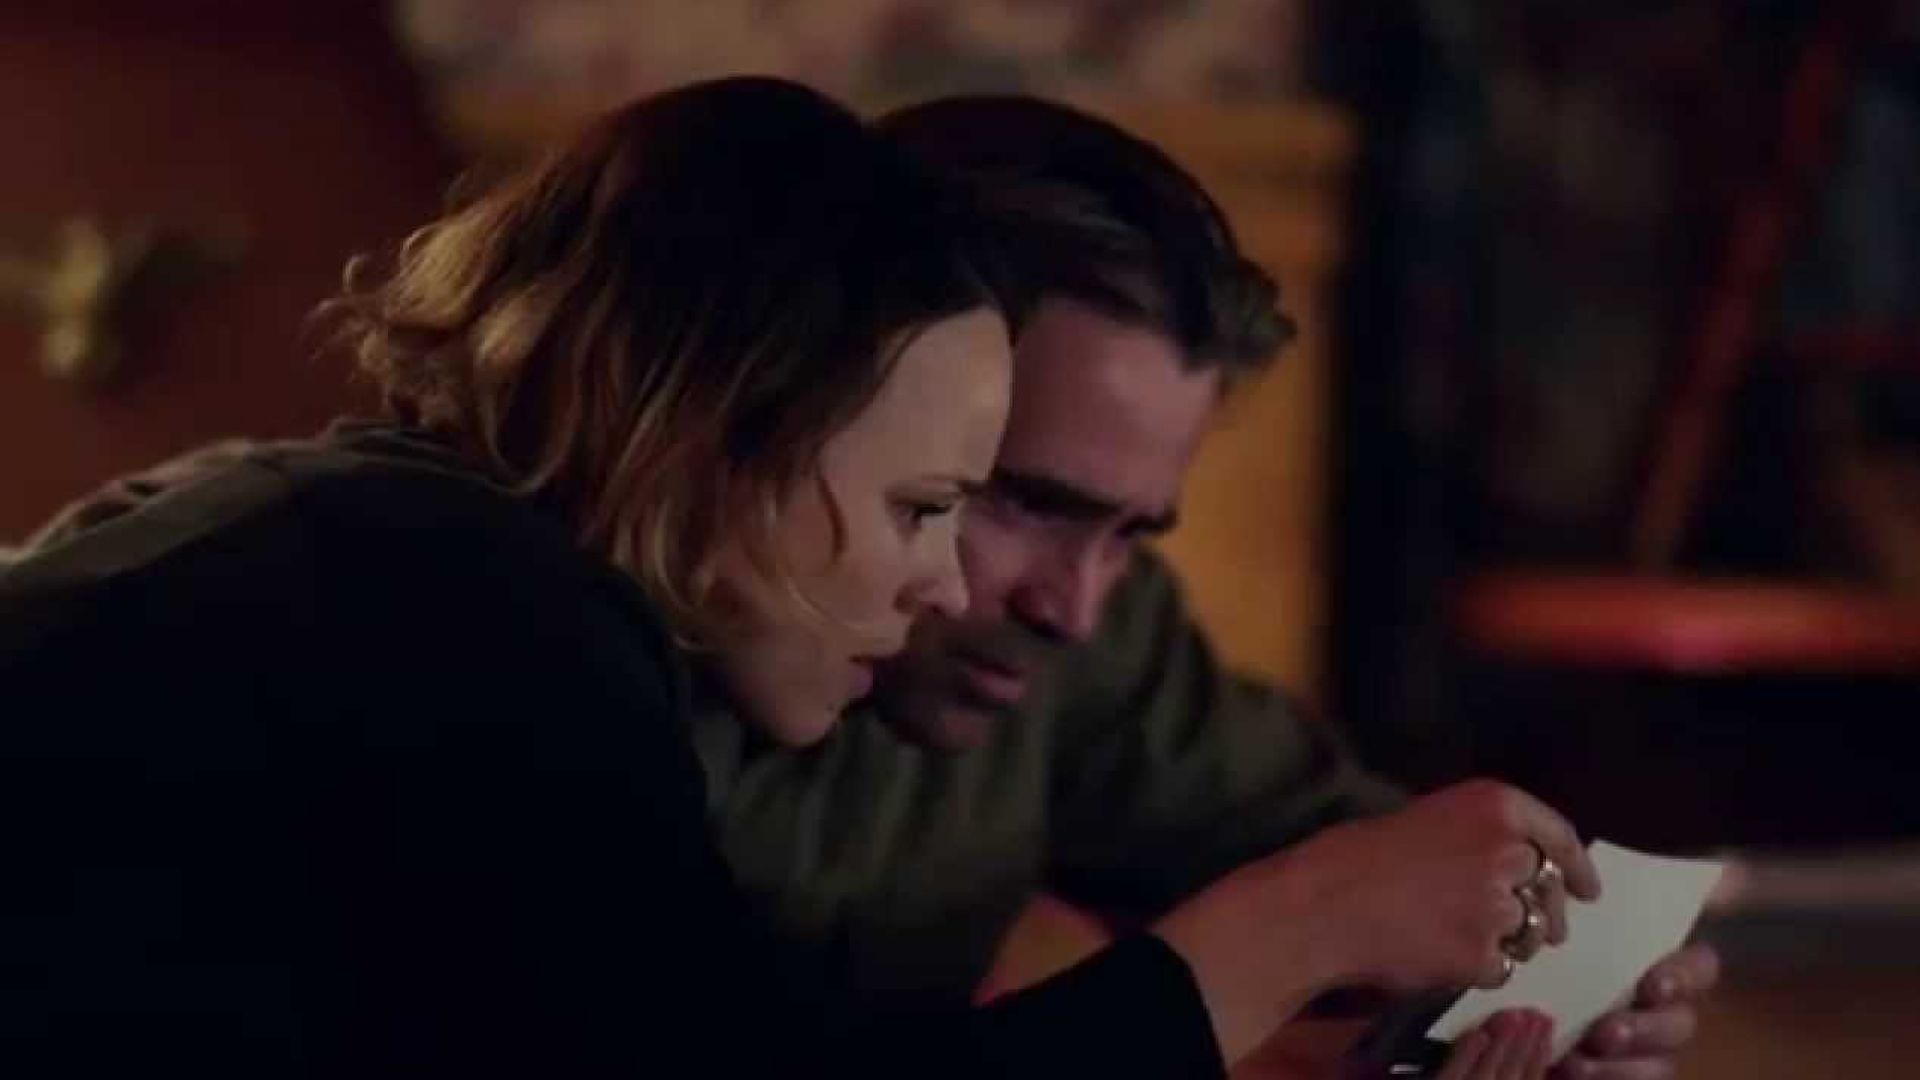 Go Behind-the-Scenes of the Second Season of &#039;True Detective